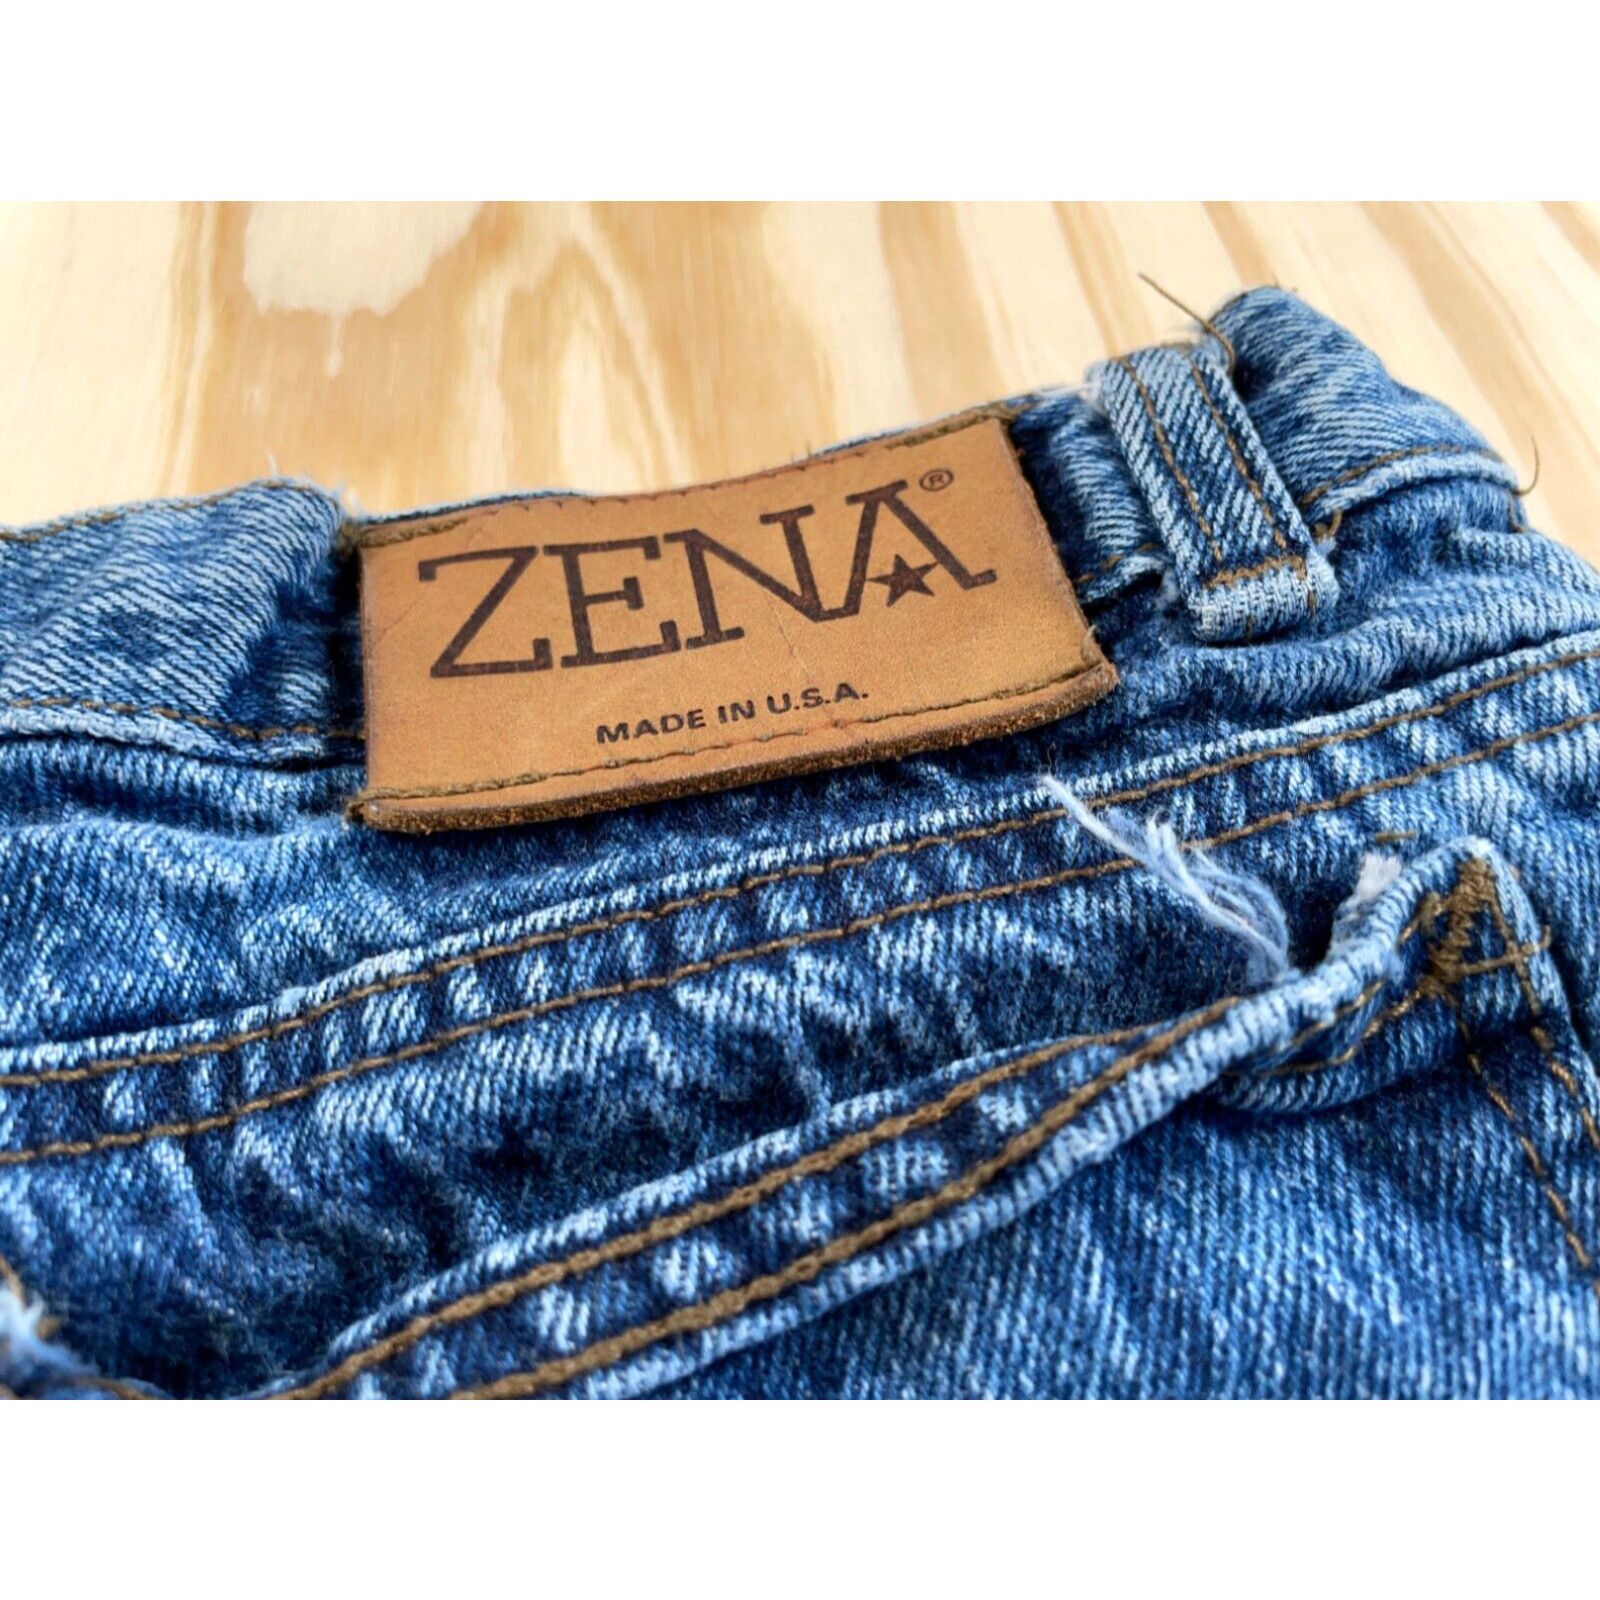 Vintage VTG 80s High Waisted Bleached Mom Jeans Women's 30 x 30 Blue Denim Zena Tapered Size ONE SIZE - 3 Thumbnail